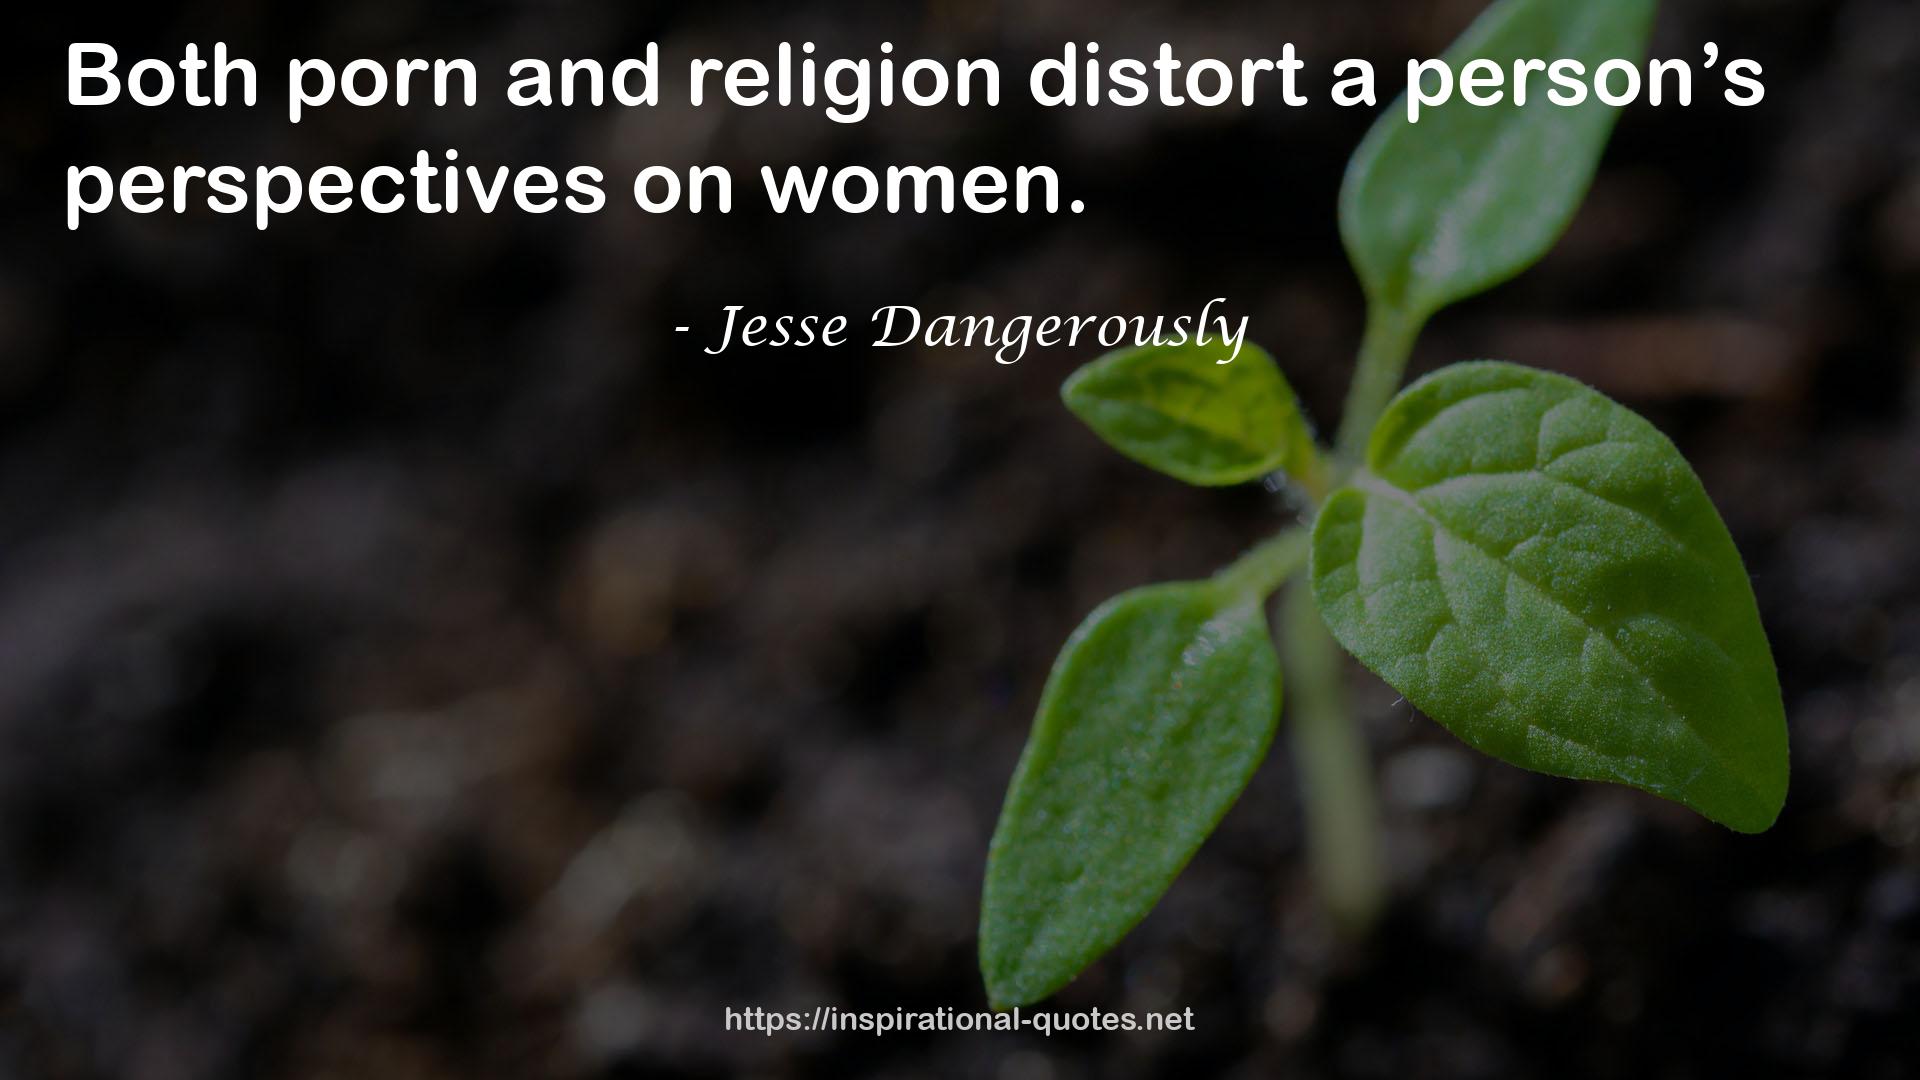 Jesse Dangerously QUOTES